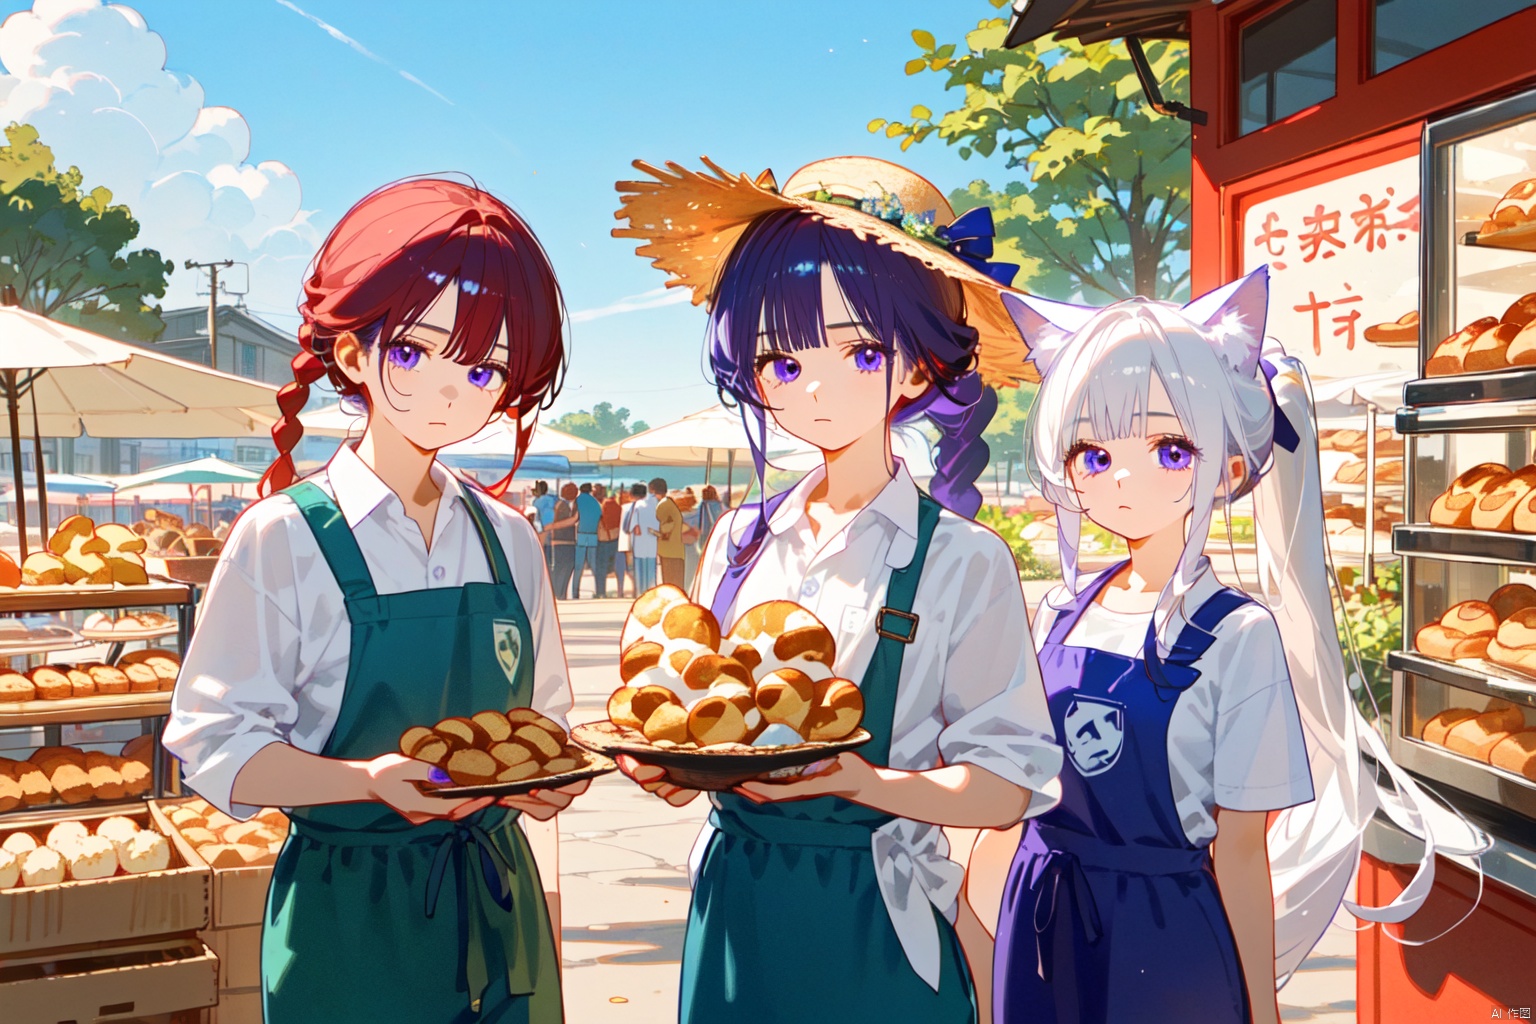 (Girl, red hair, blue eyes, fox ears, slightly curled long hair, Fried Dough Twists braids, straw hats, aprons, green skirts, bouquets)

(Youth man, purple eyes, white hair, wolf ears, ponytail, dark blue work pants, white shirt)

Bakery, Market